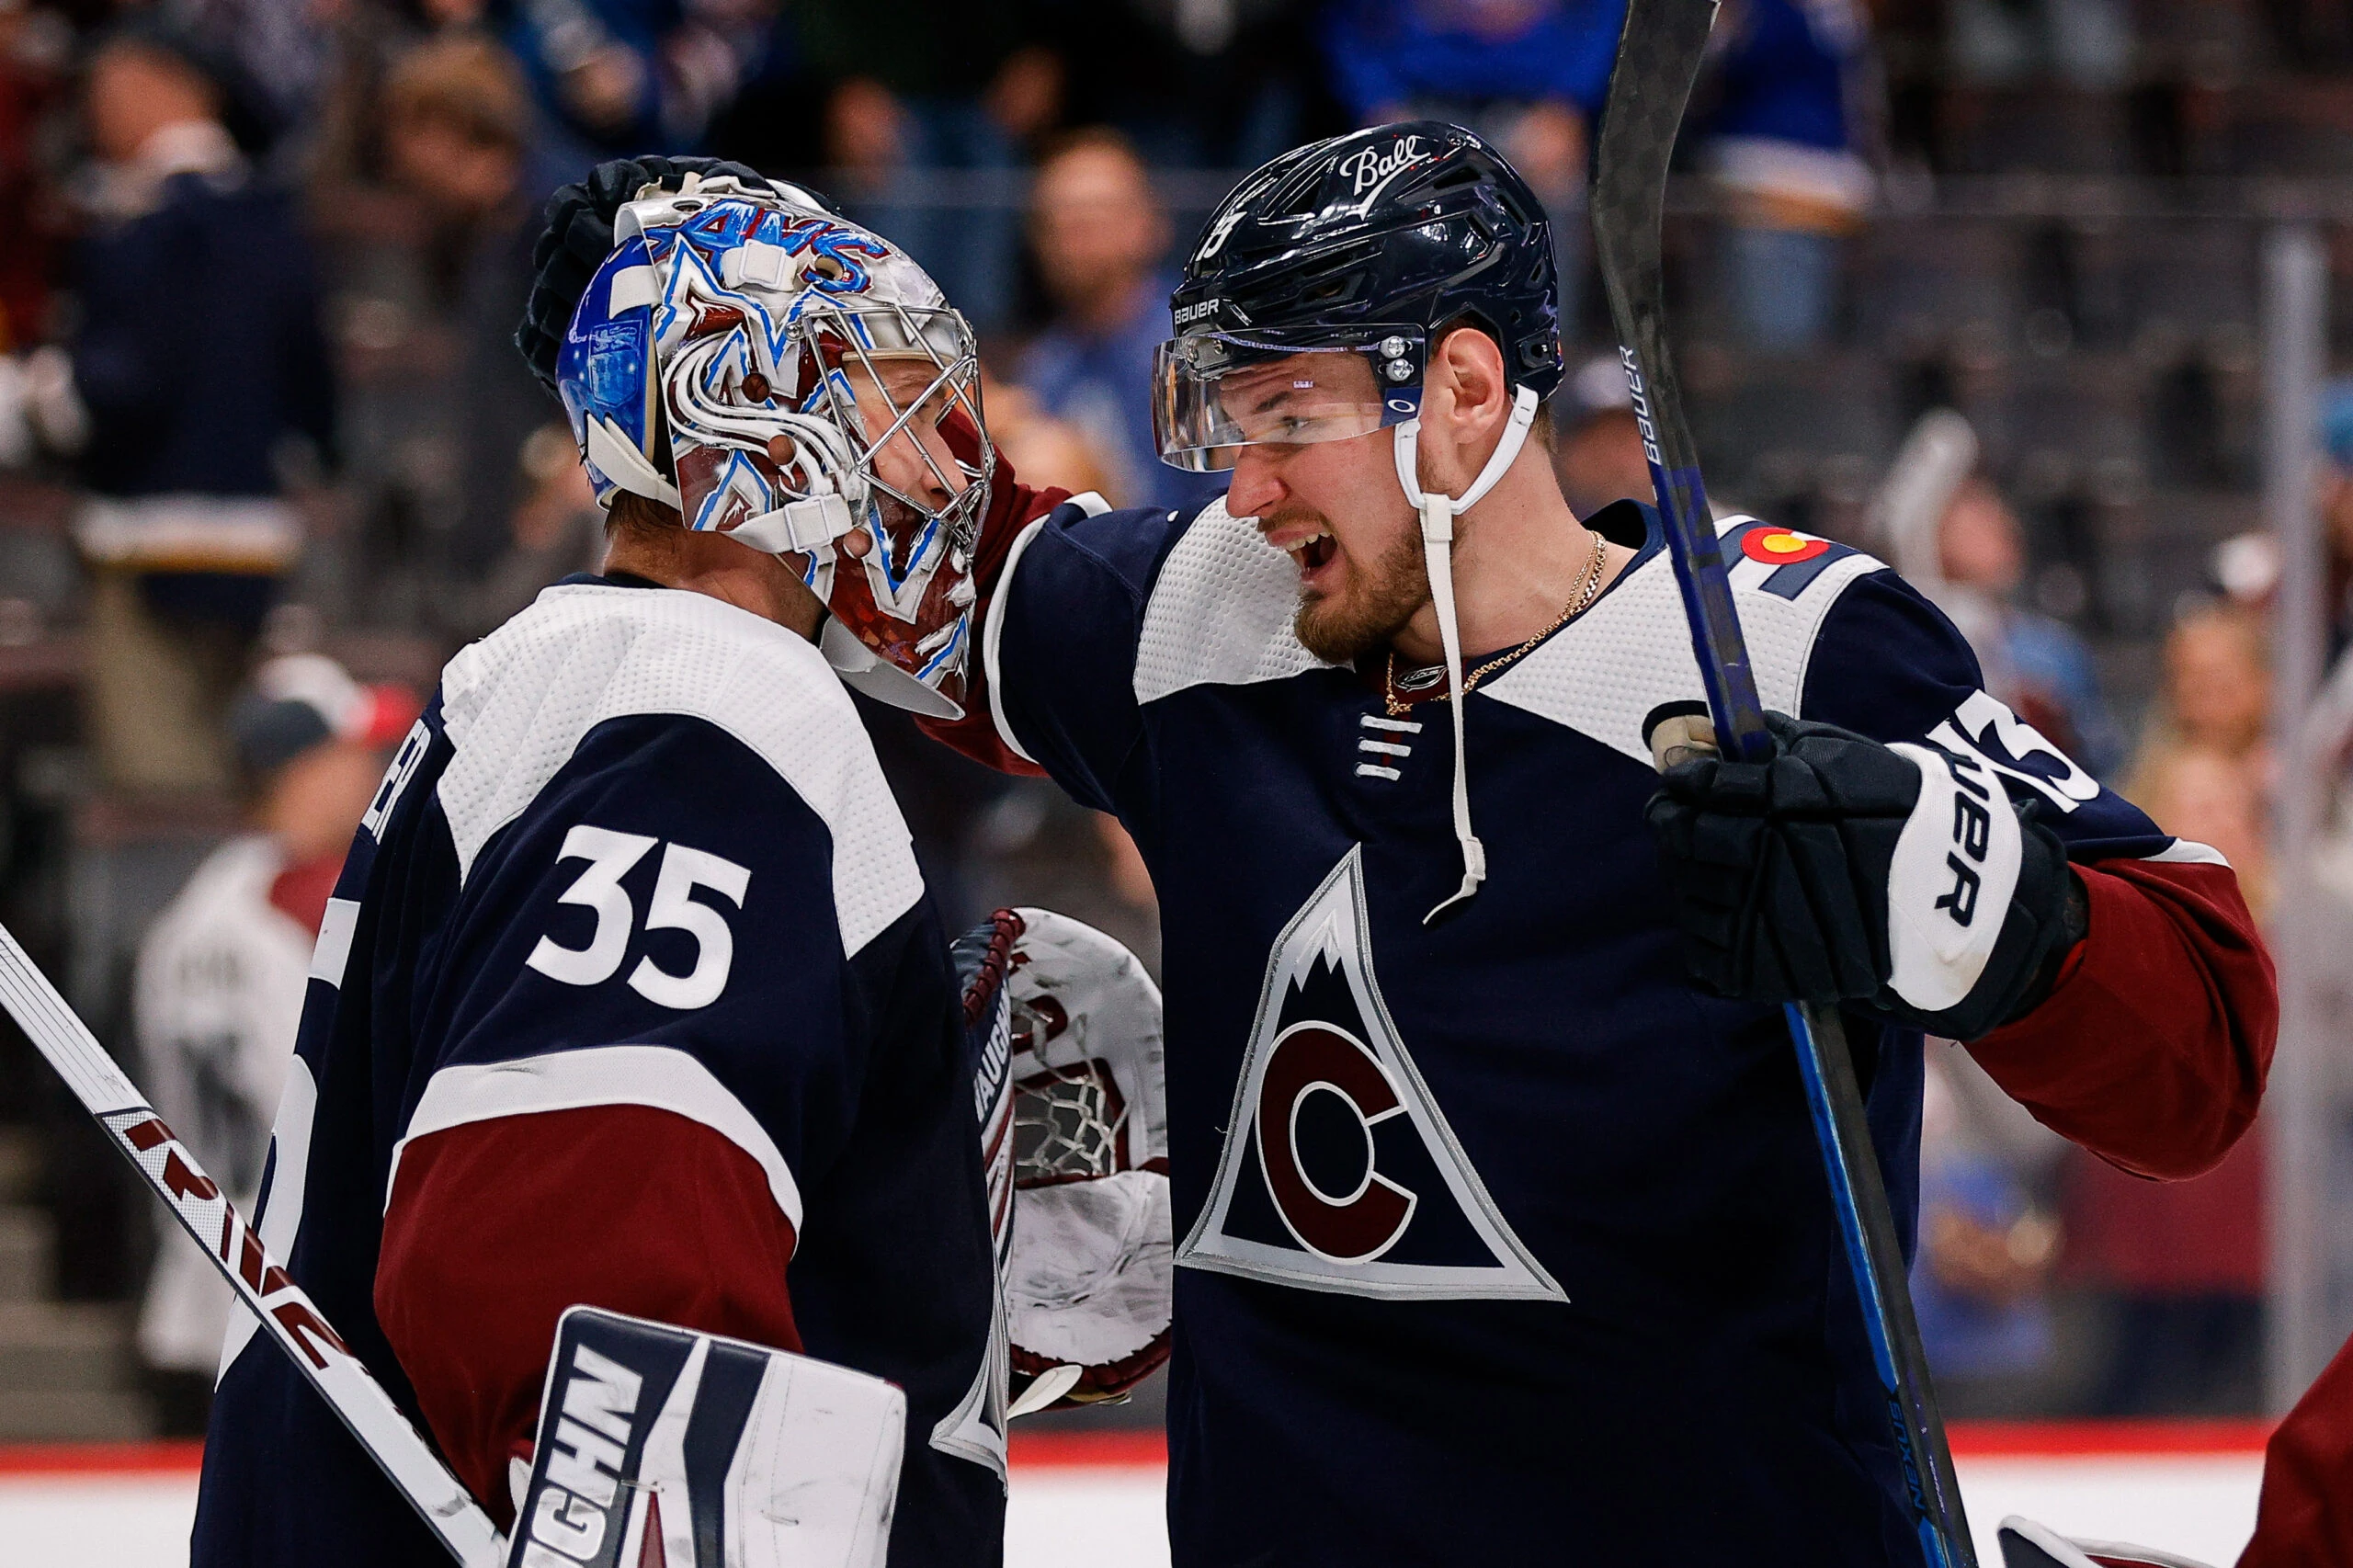 Colorado Avalanche right wing Valeri Nichushkin (13) celebrates with goaltender Darcy Kuemper (35) after the game against the St. Louis Blues at Ball Arena